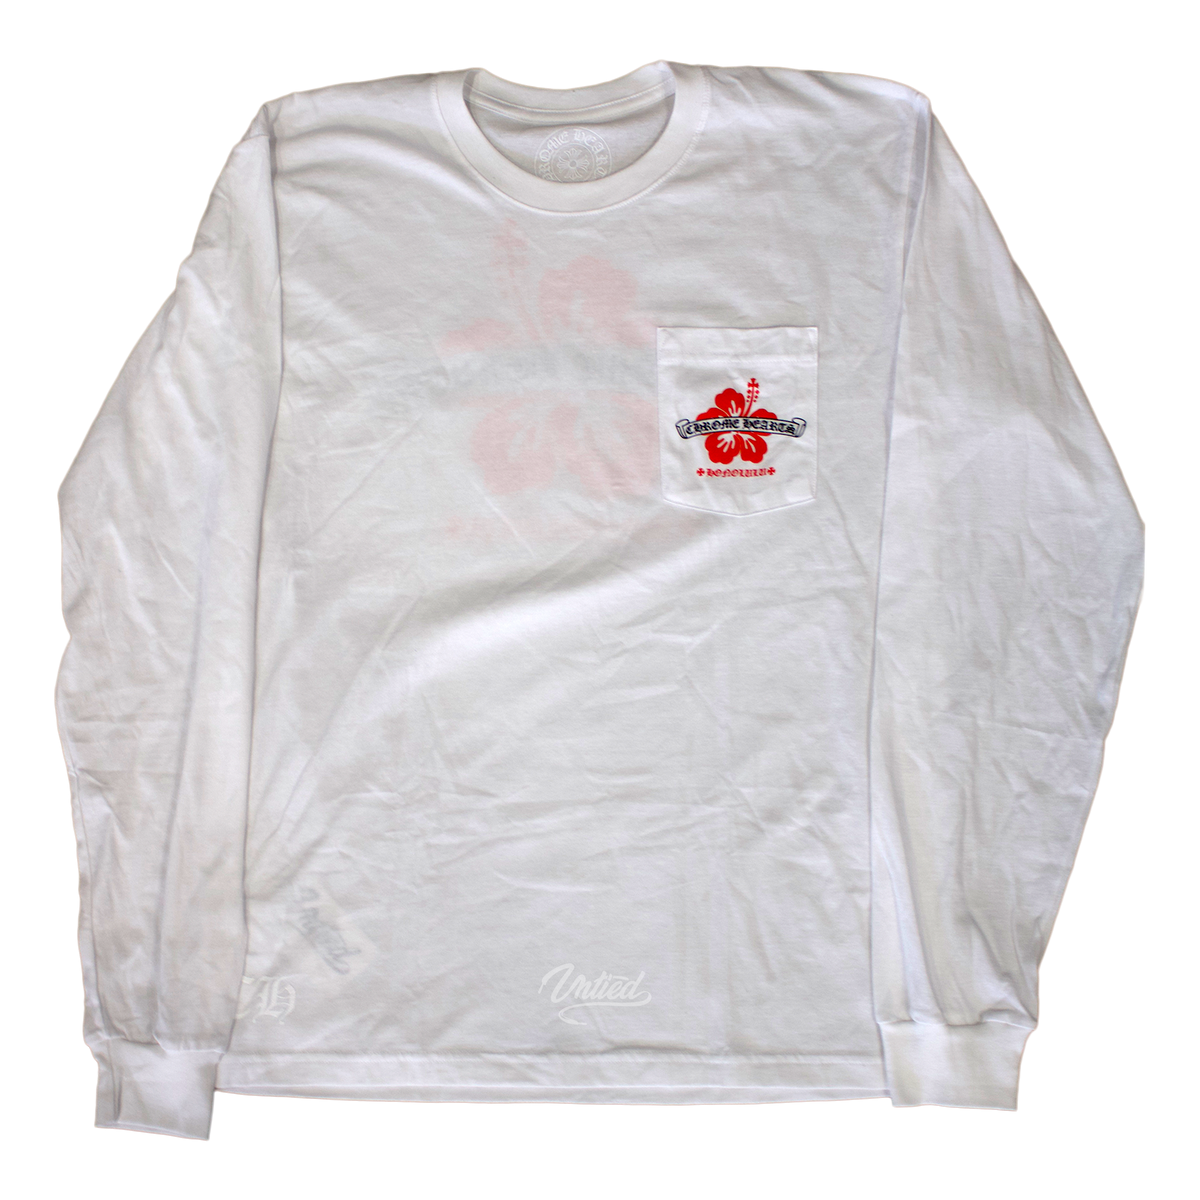 CHROME HEARTS FLOWER LOGO TEE Available in store now . . Waze